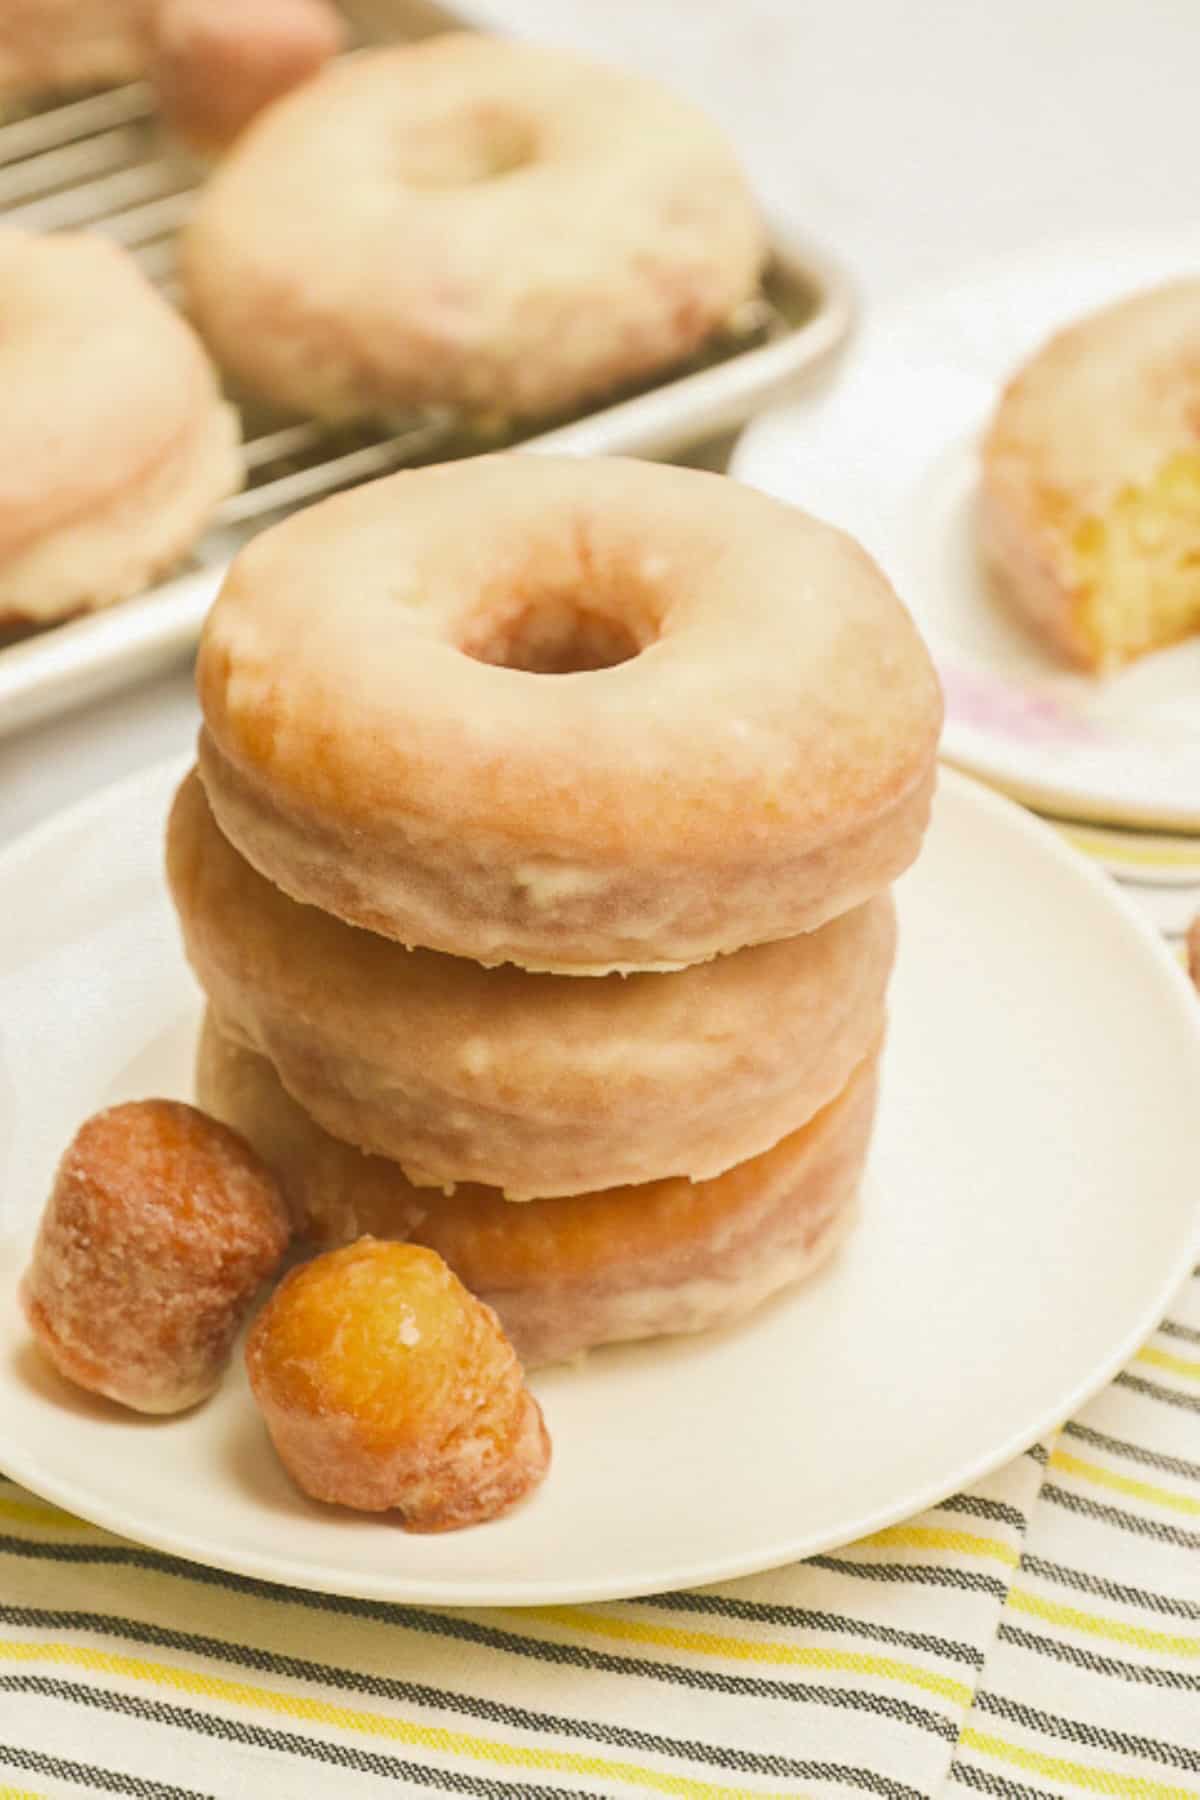 A stack of decadent glazed donuts ready to indulge